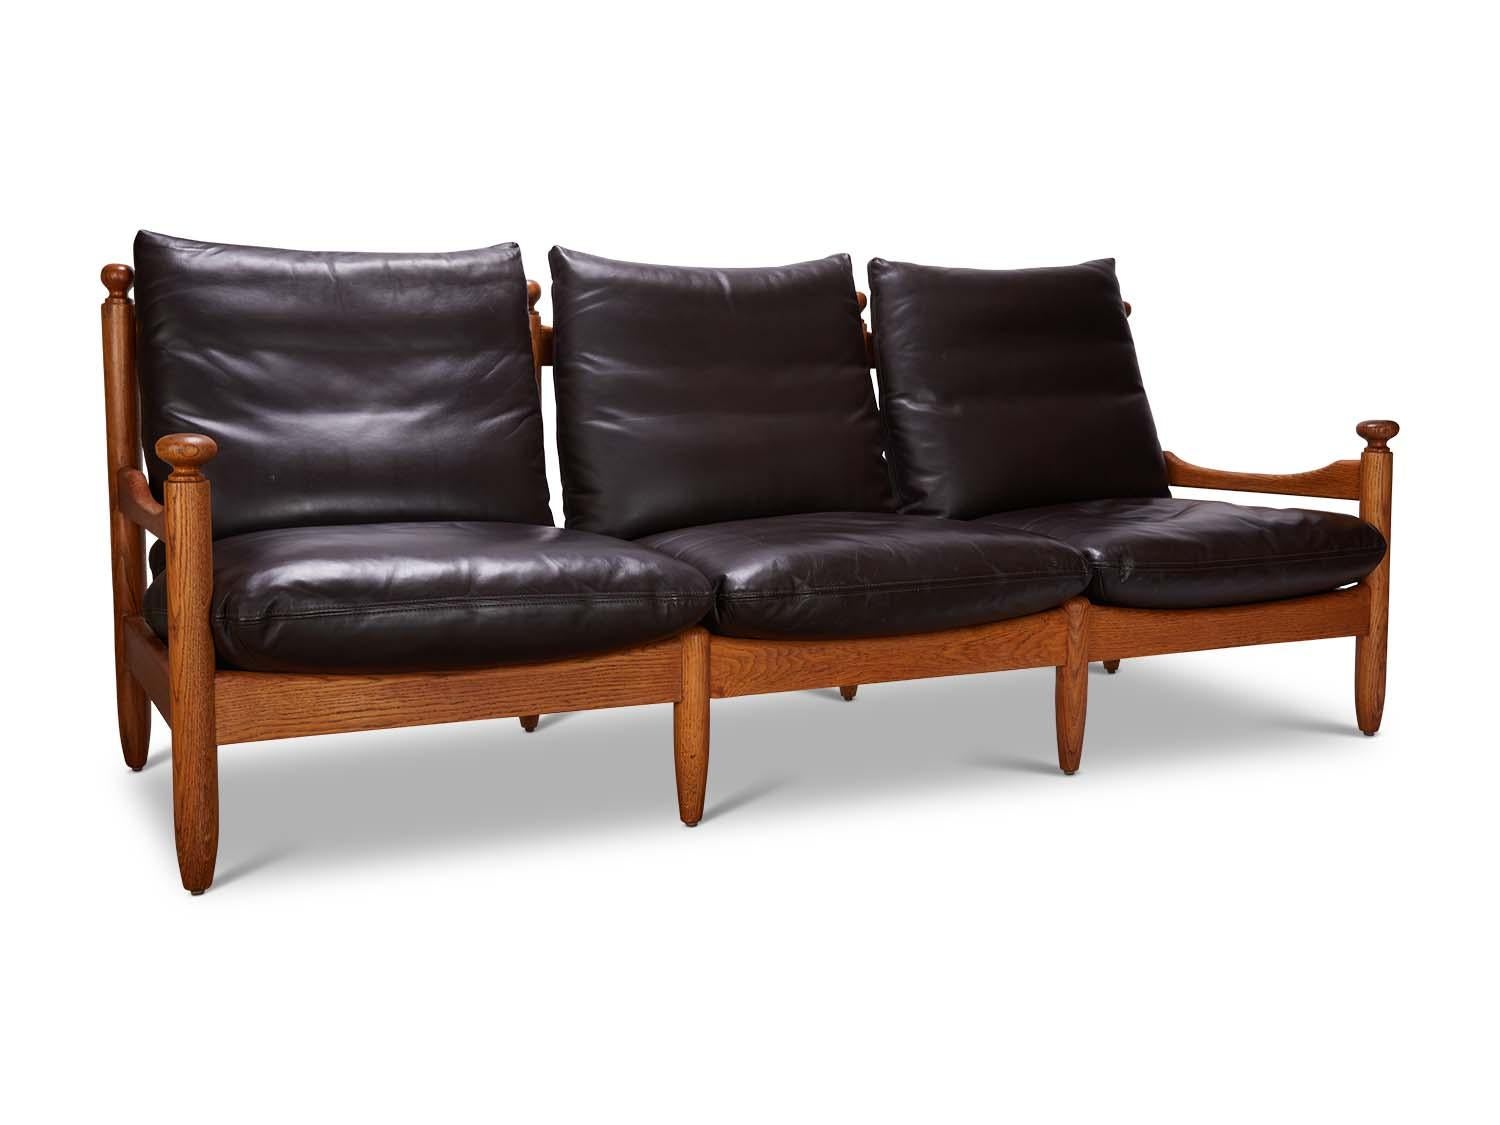 French oak and black leather sofa.